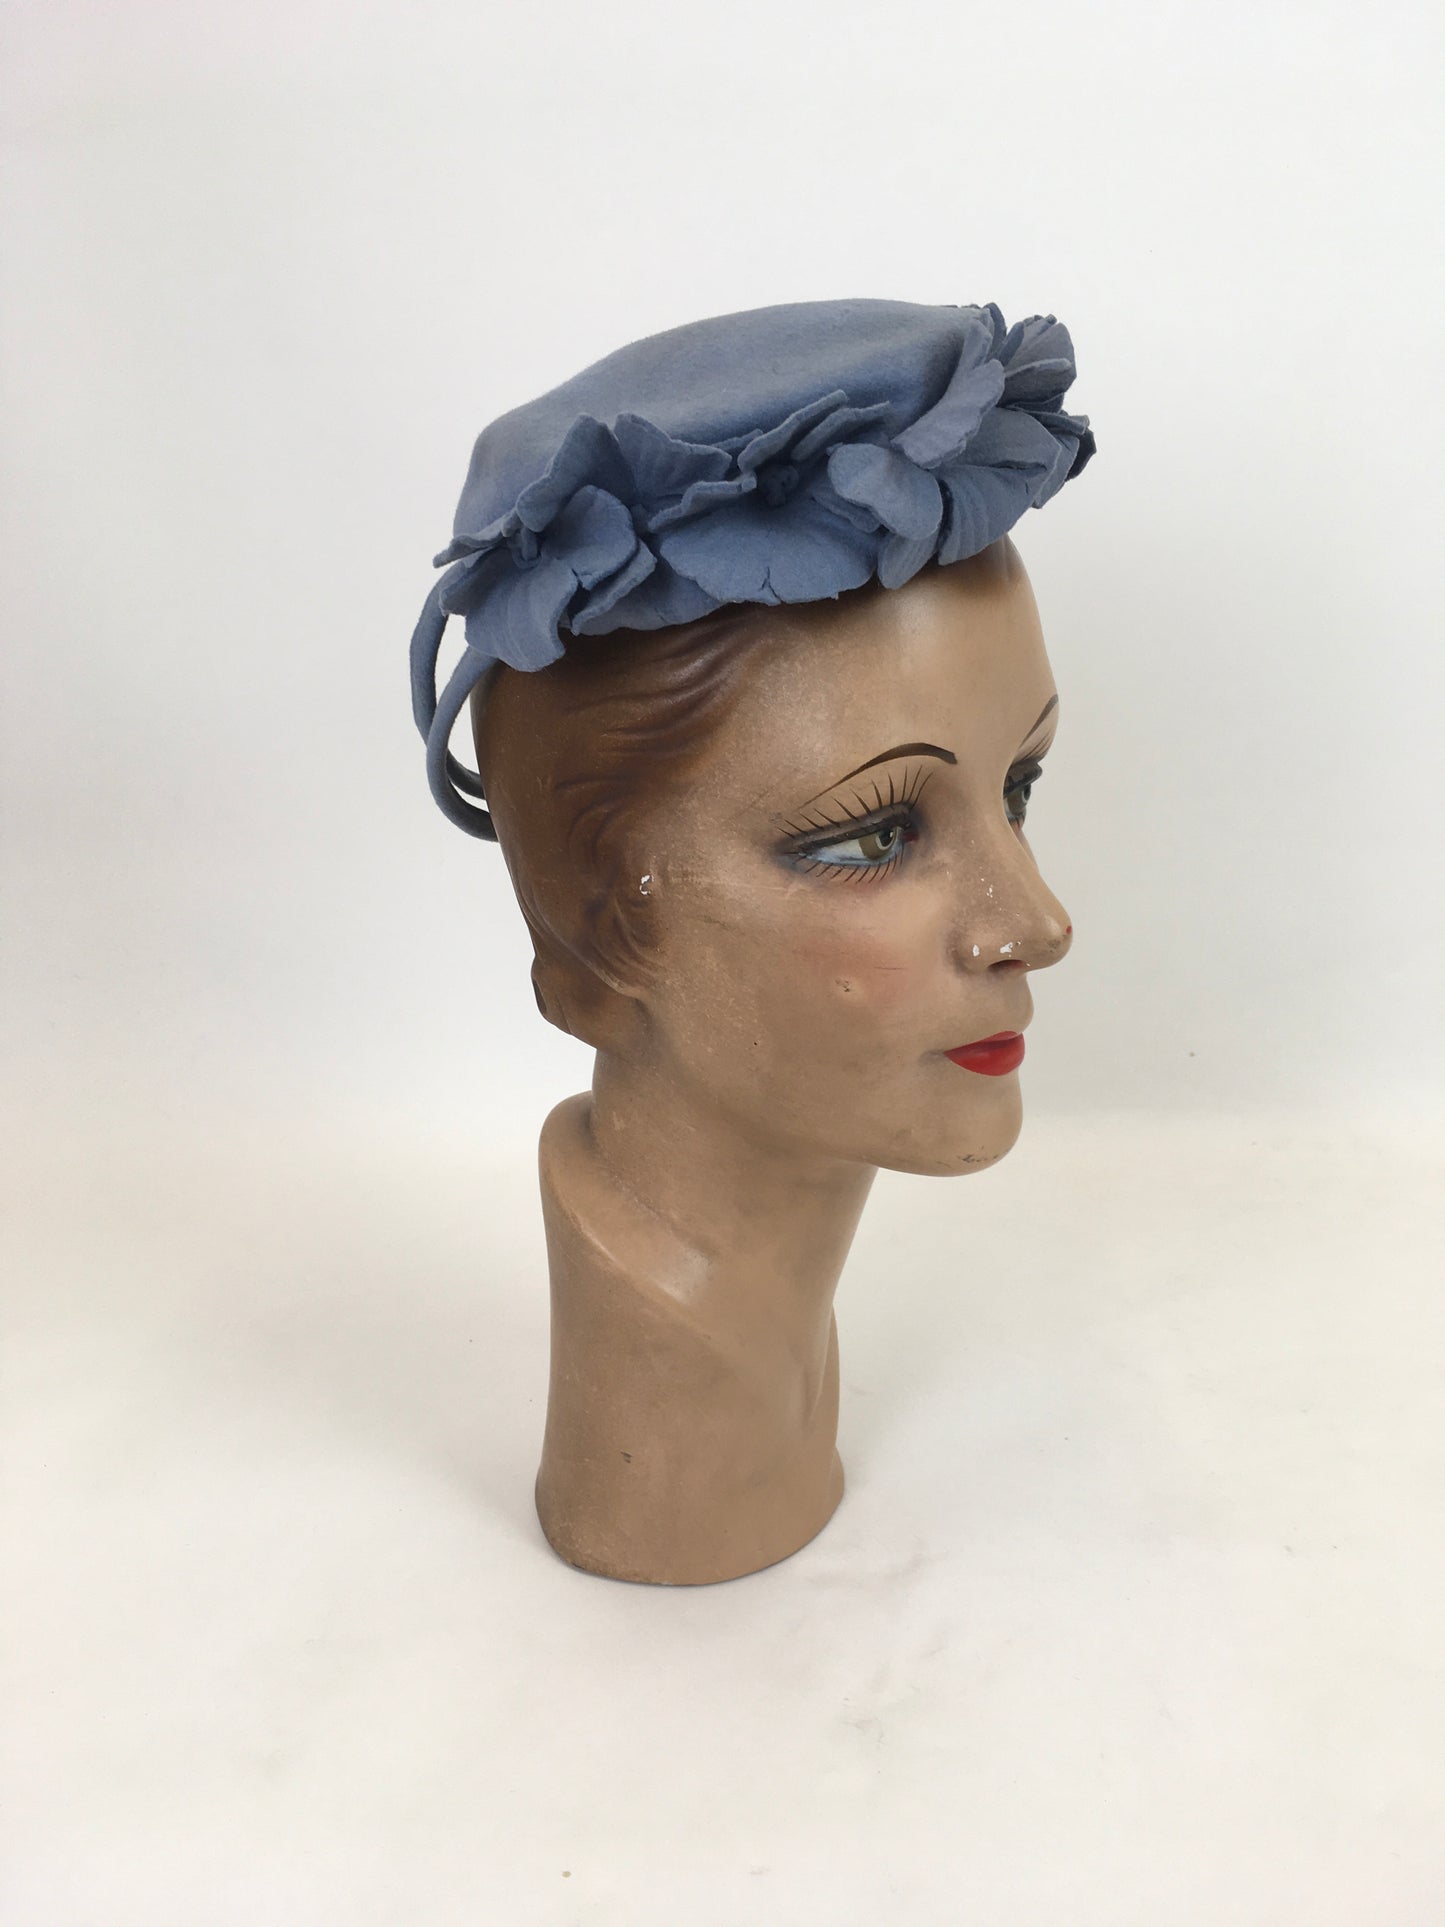 Original 1940’s New York Creations Felt Topper Hat - With Floral Adornment in Cornflower Blue